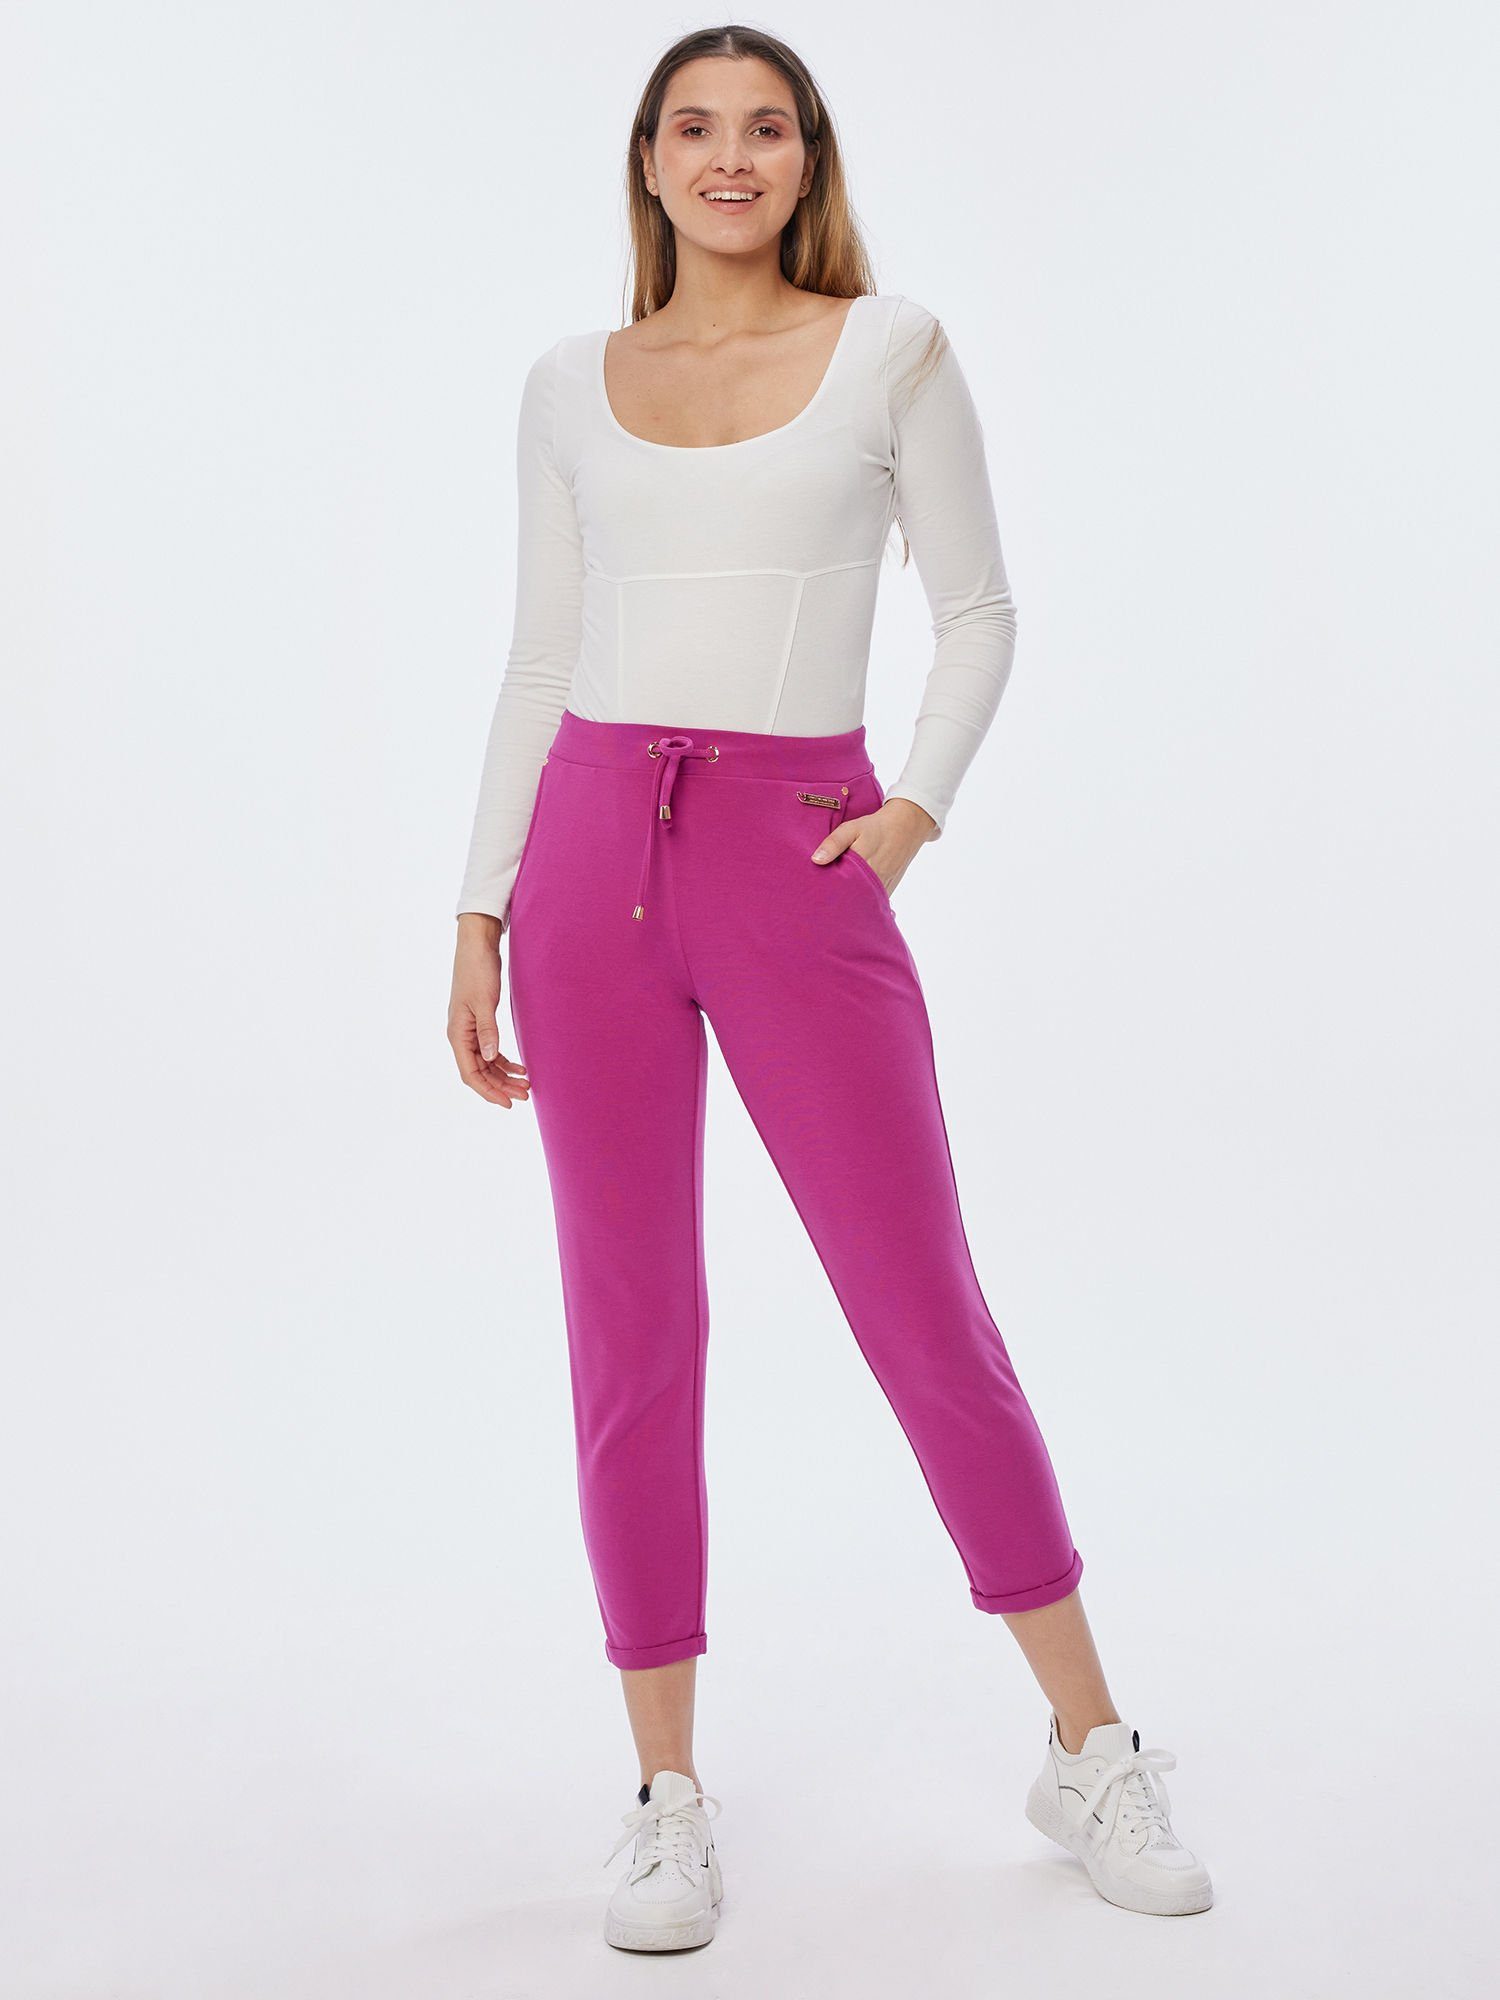 Christian Materne Jogger Pants Relaxhose mit Umschlagsaum fuchsia